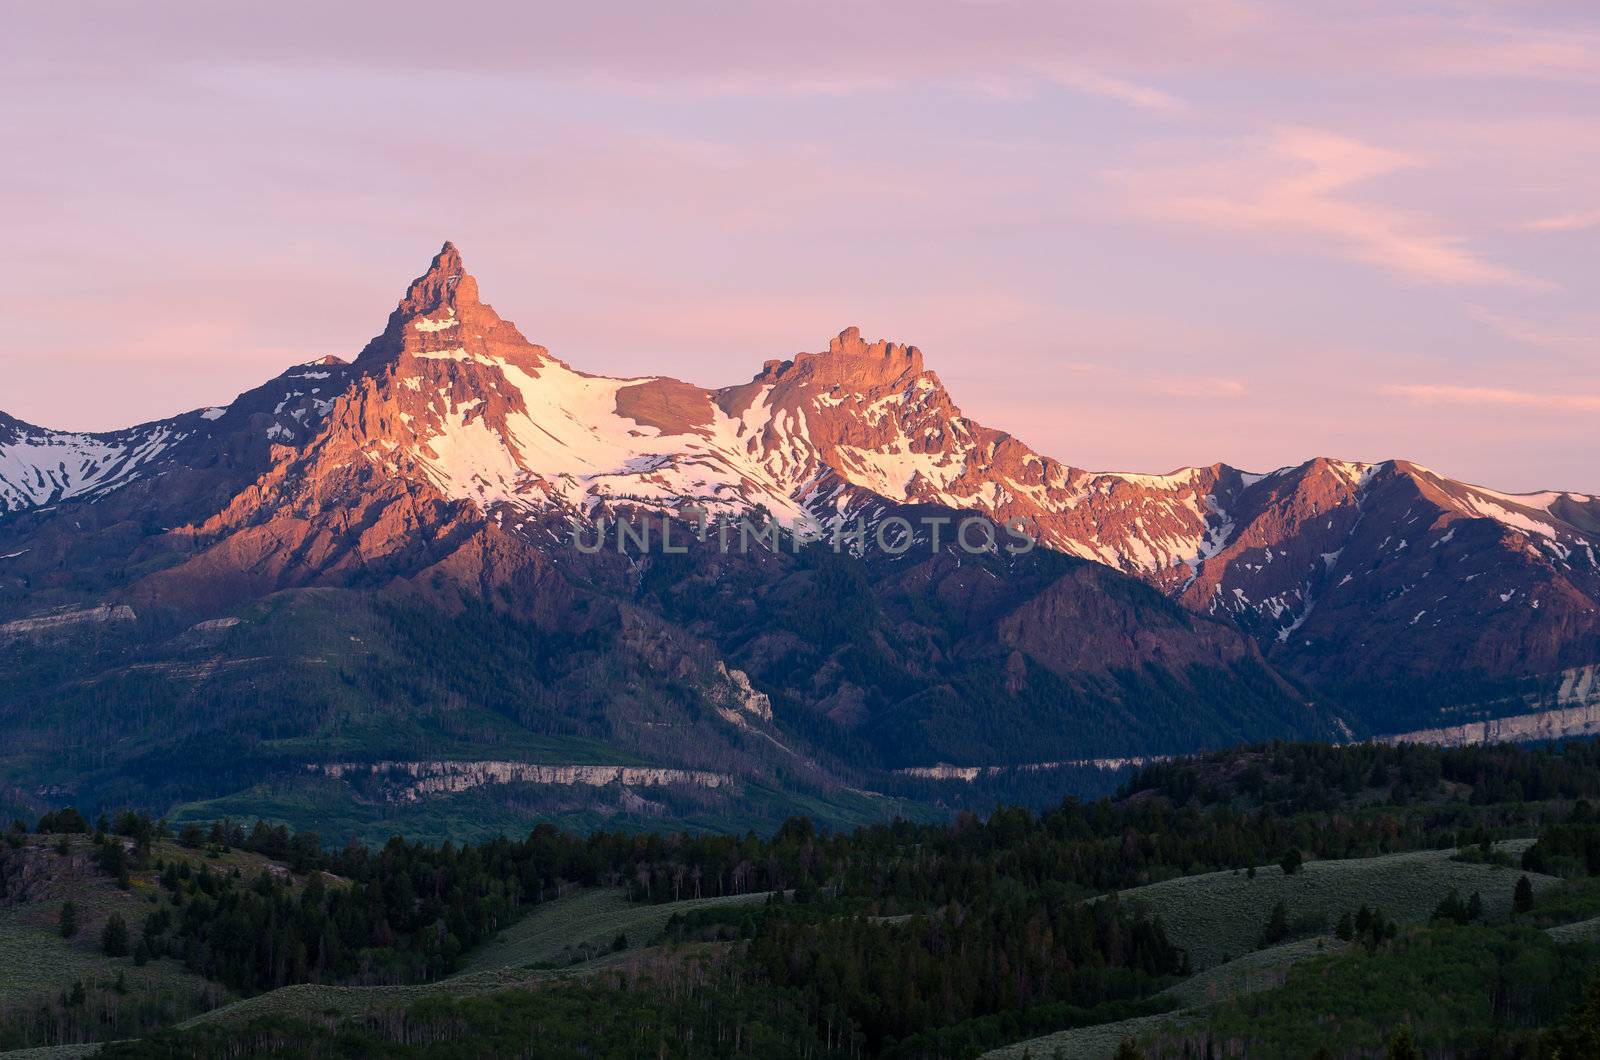 Pilot Peak (left) and Index Peak (center) at sunrise in summer, Shoshone National Forest, Park County, Wyoming, USA